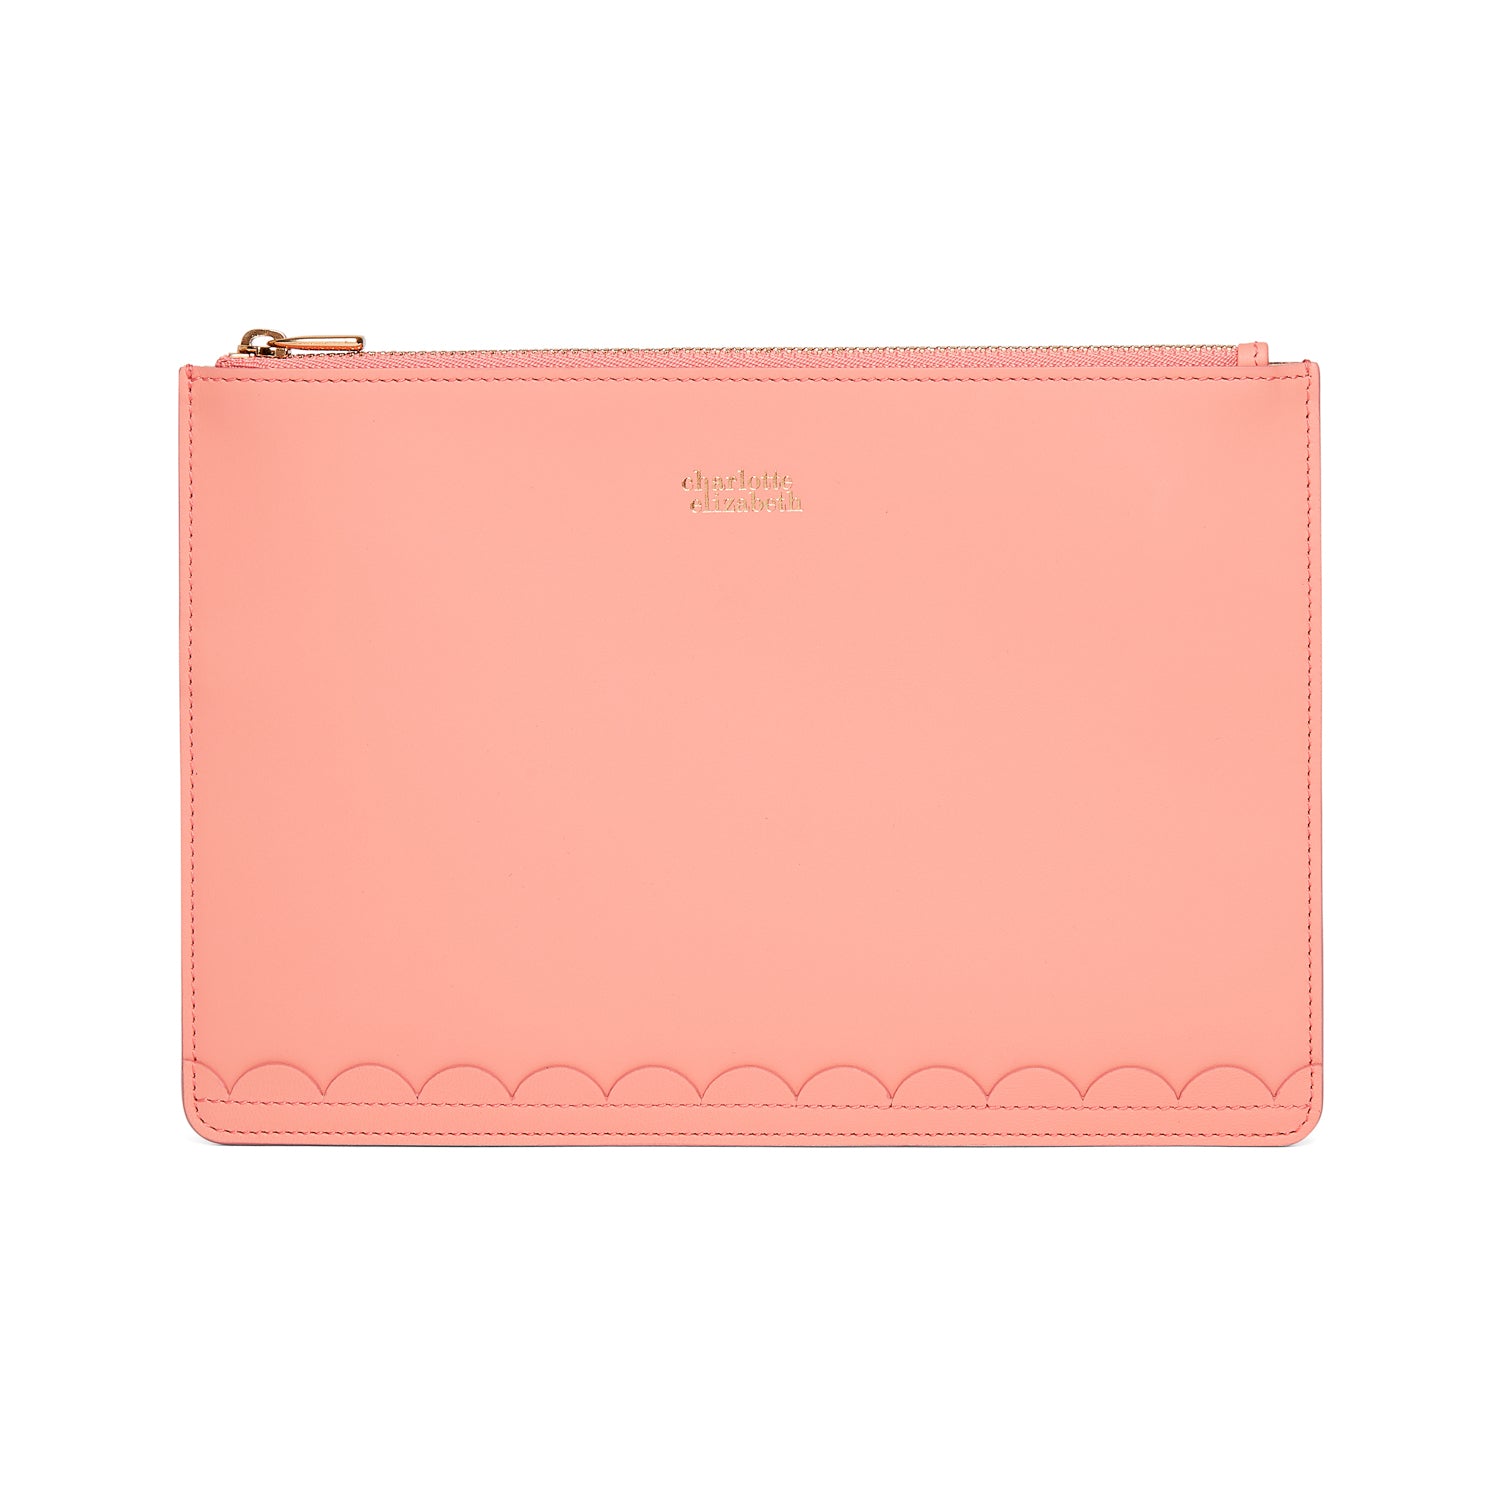 kitsch pink cute clutch bag mini flat pouch for your essentials